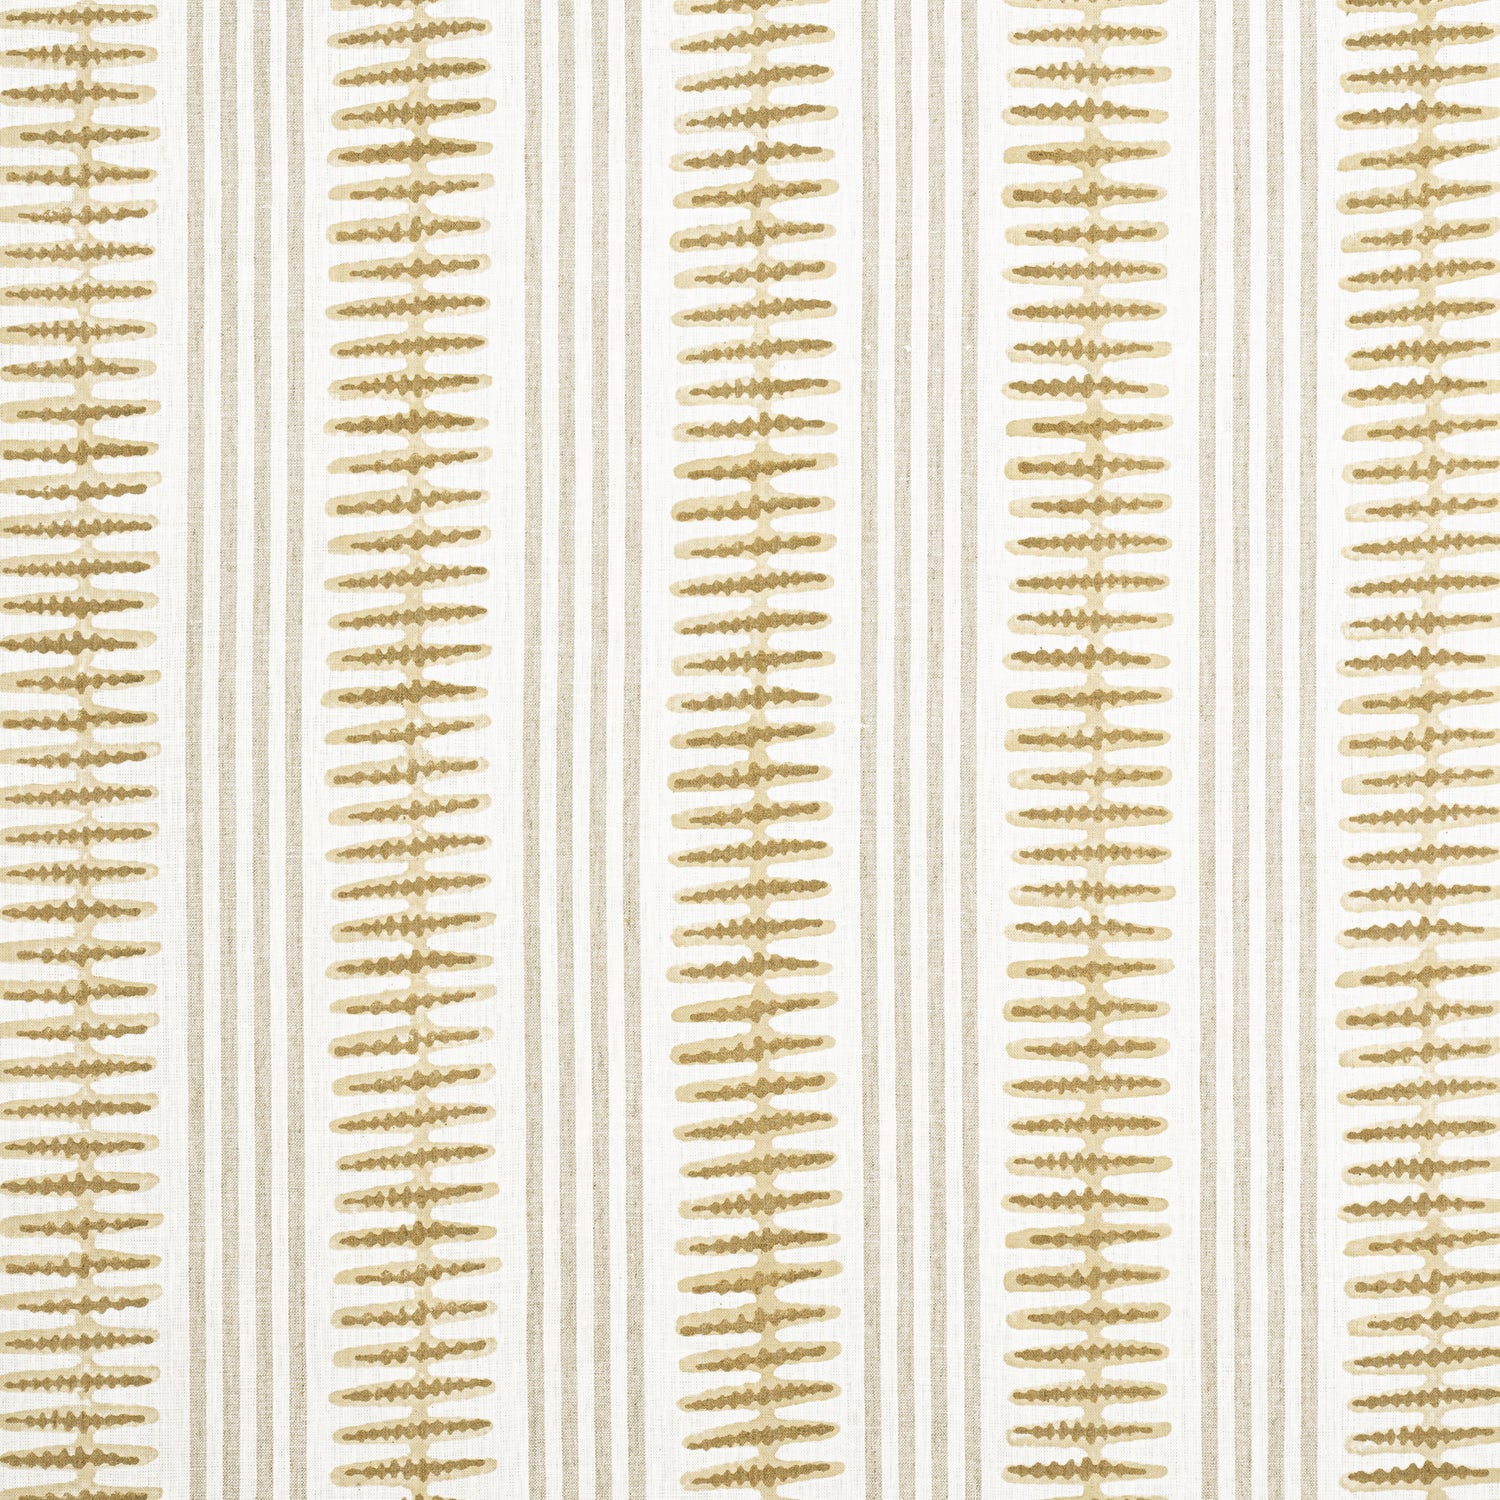 Indo Stripe fabric in camel color - pattern number F981316 - by Thibaut in the Montecito collection